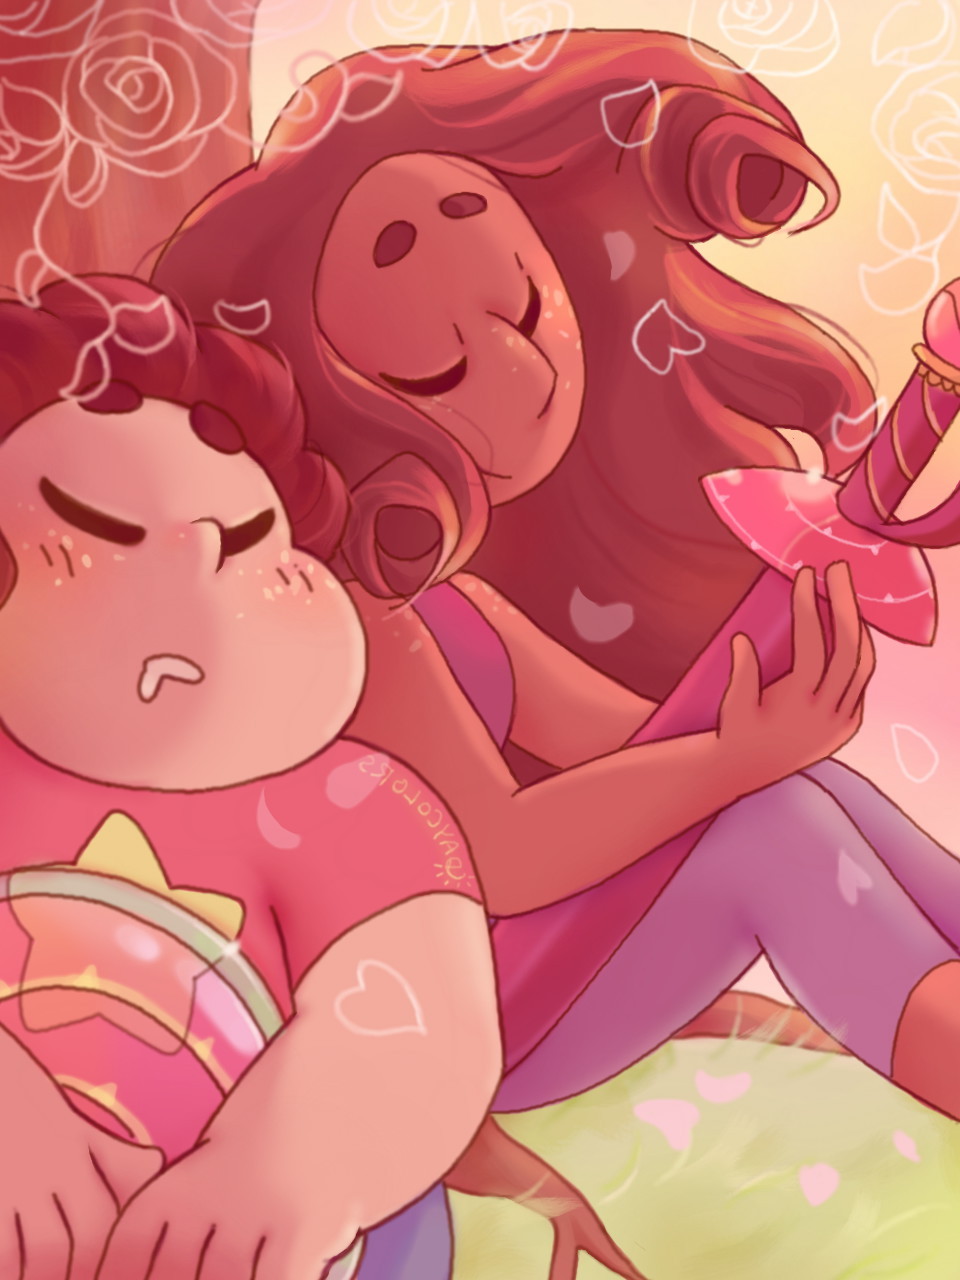 Couple of steven and connies I did for @stevenuniverse-ship-tribute!! Please check it out if you haven’t already! Songs I listened to- first one was Hurts like heaven and weirdly the second one was...